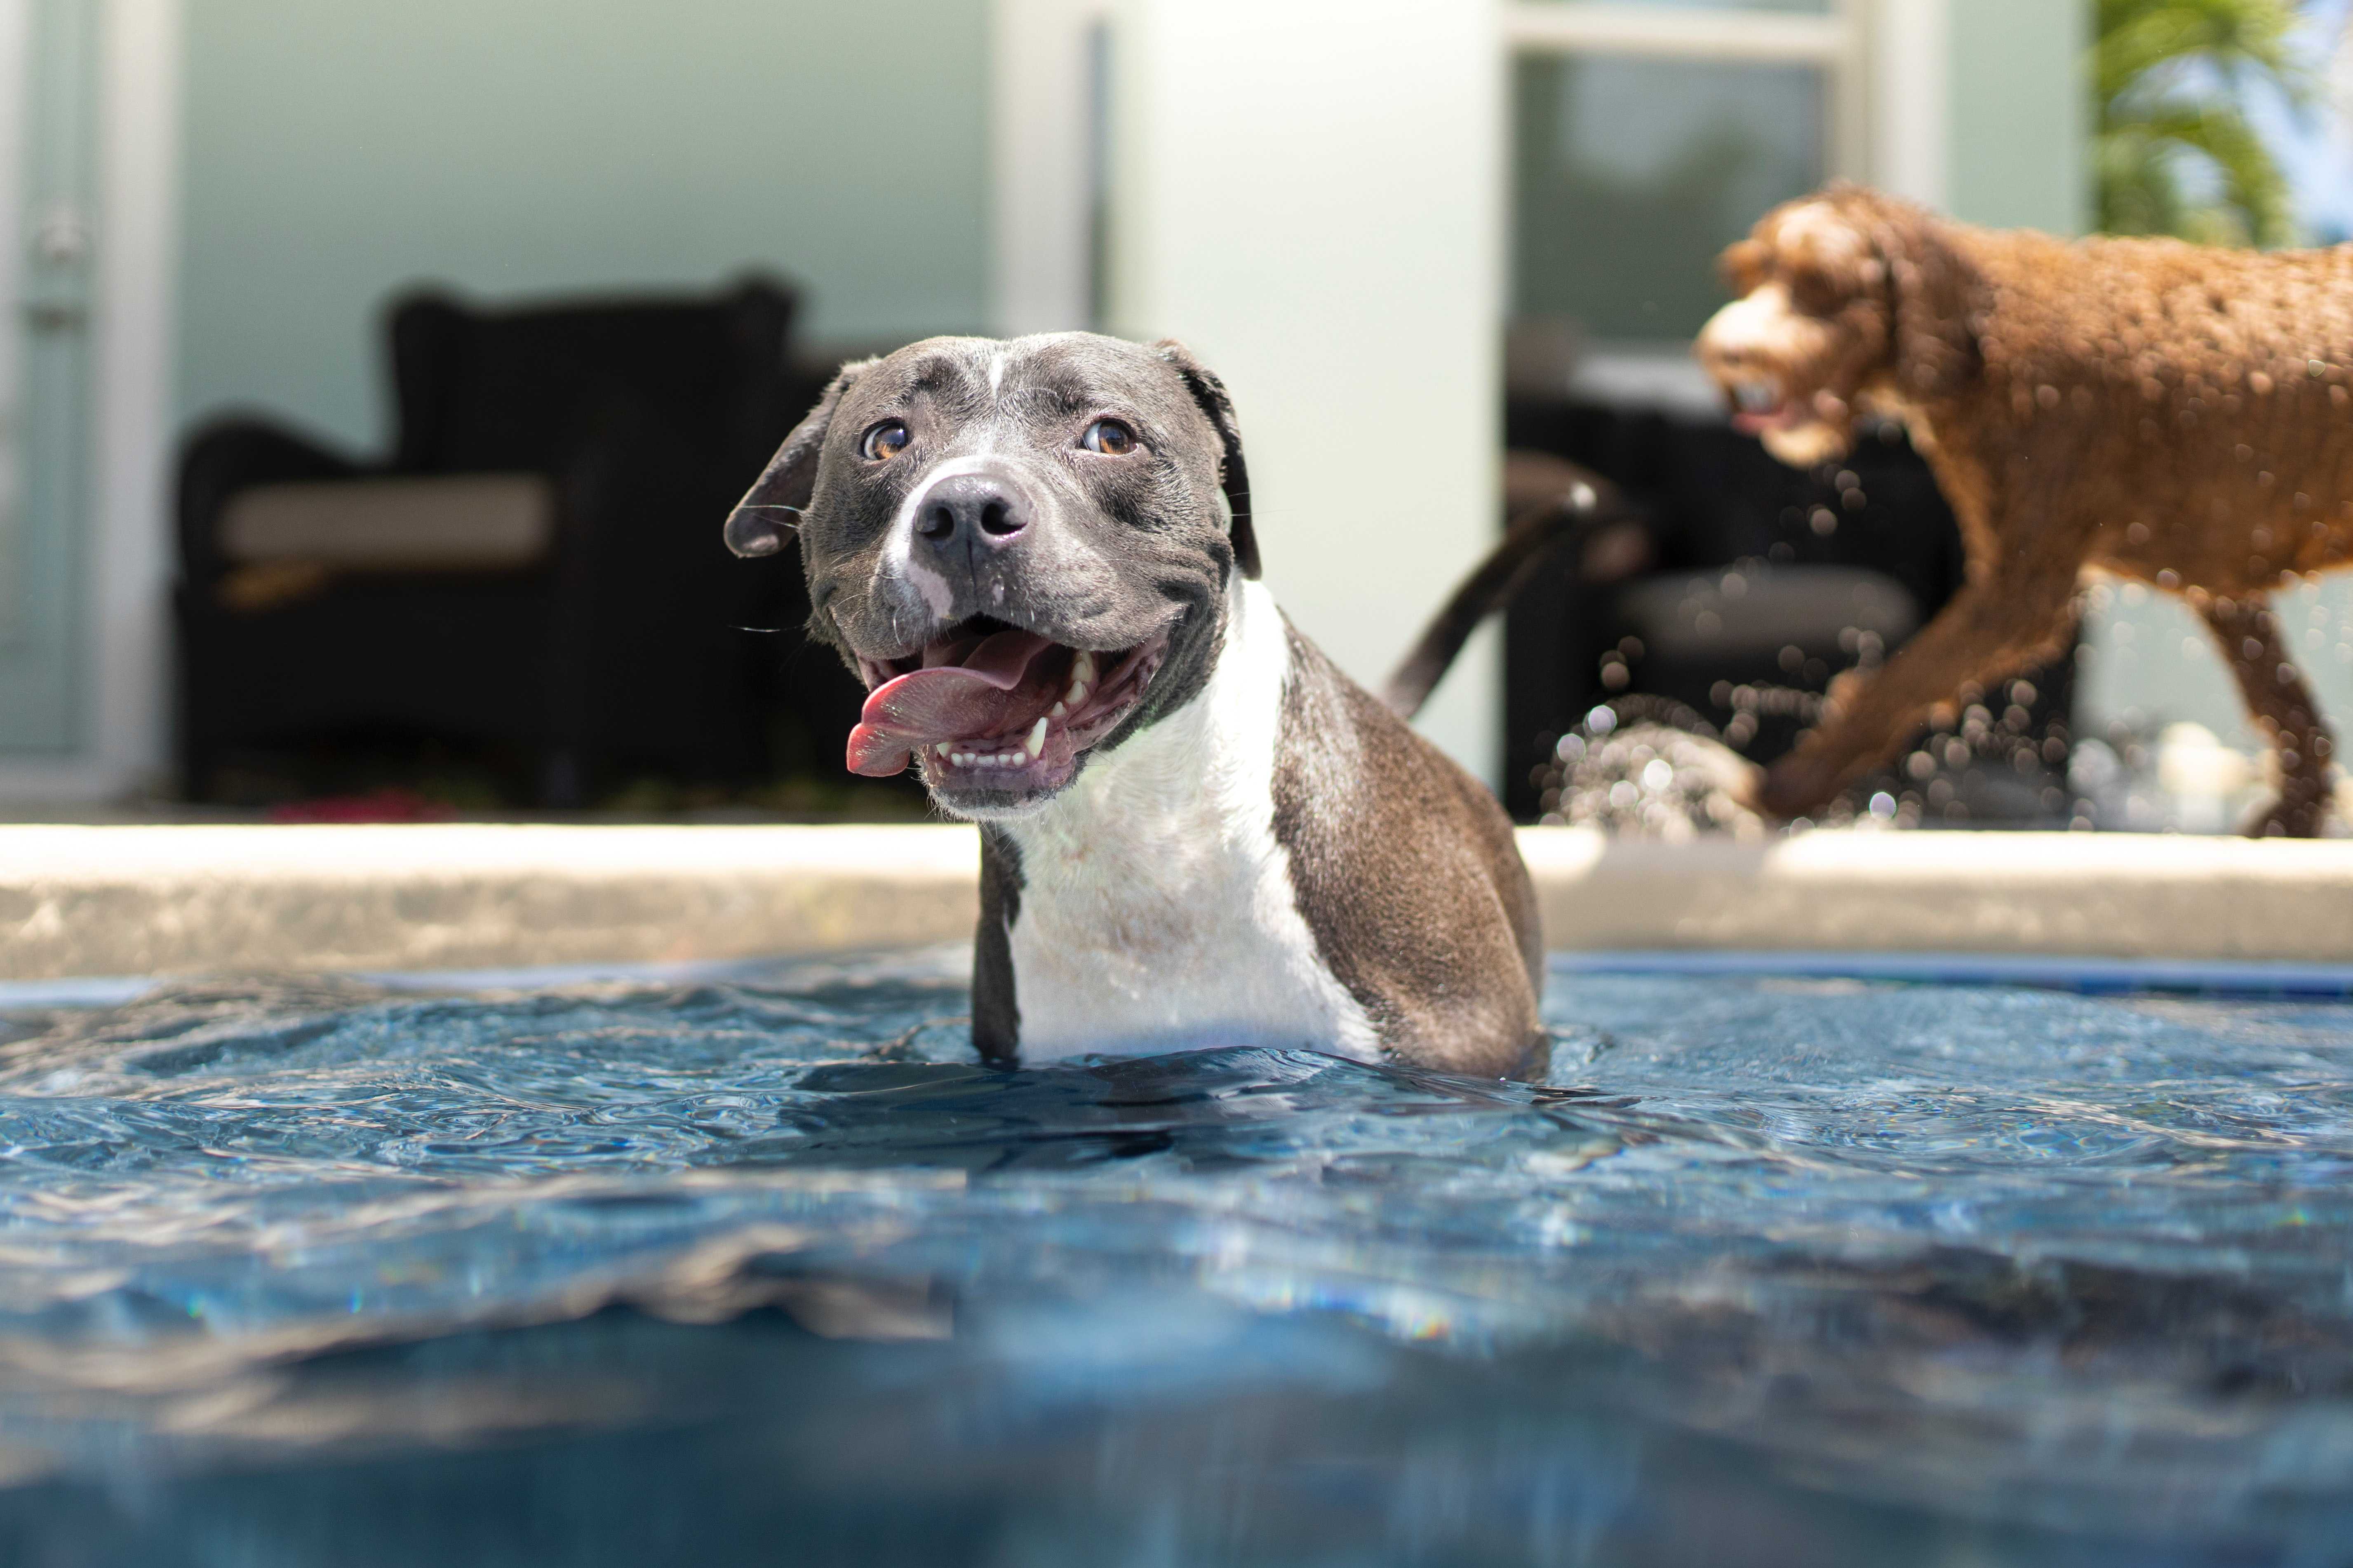 A grey and white pitbull wading happily in a pool